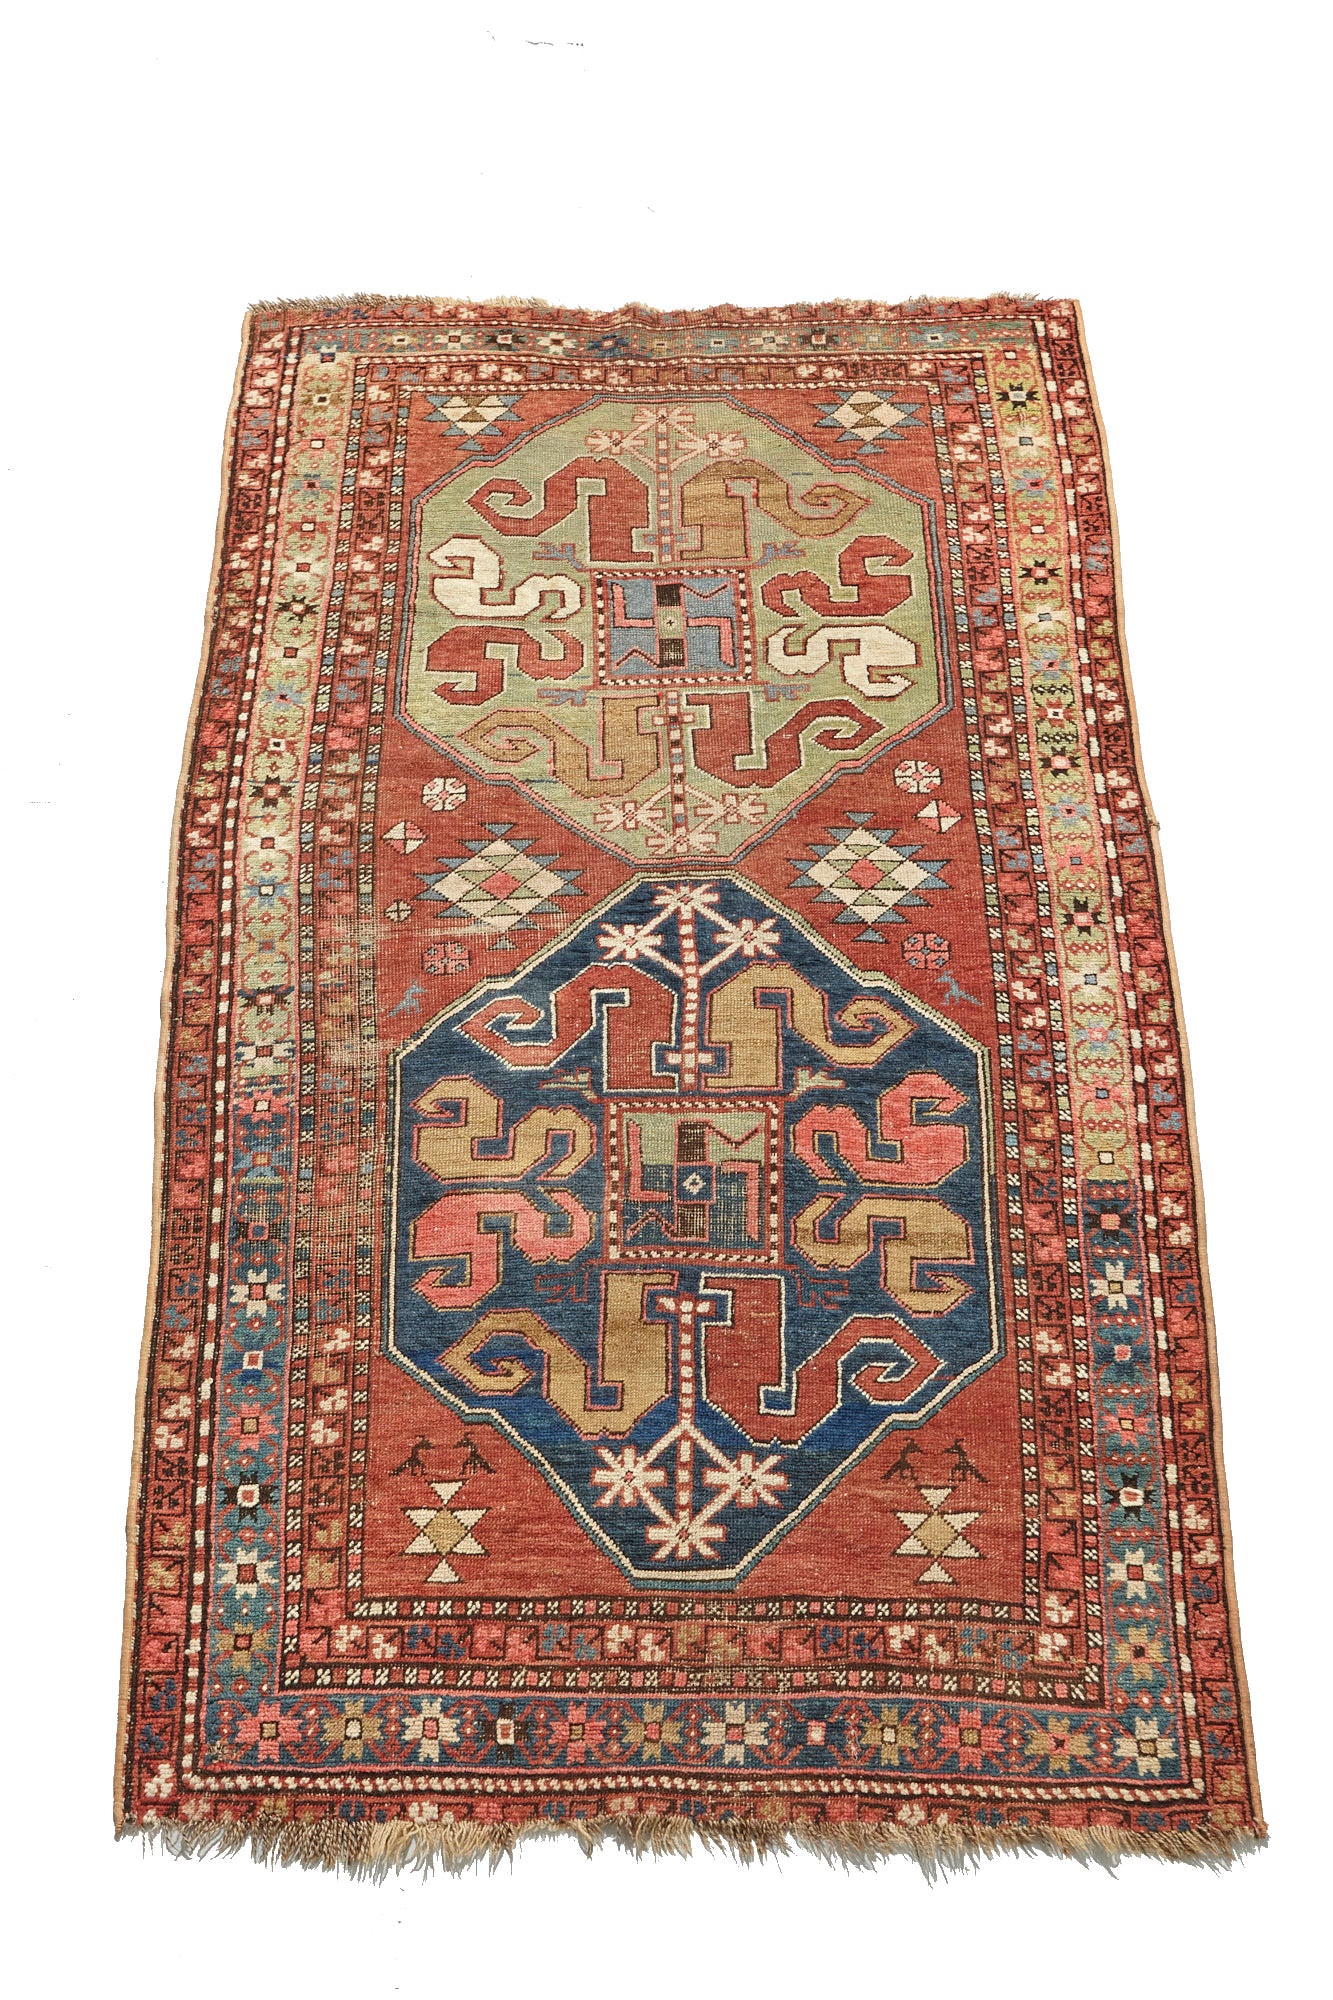 Kazak Cloudband antique Persian rug with rich pink base and two large medallion designs in the center, one pale green, one blue with pink, red, gold, cream and blue designs intricately hand woven throughout. A beautiful piece for a bedroom, hallway, dining room or study - Available from King Kennedy Rugs Los Angeles